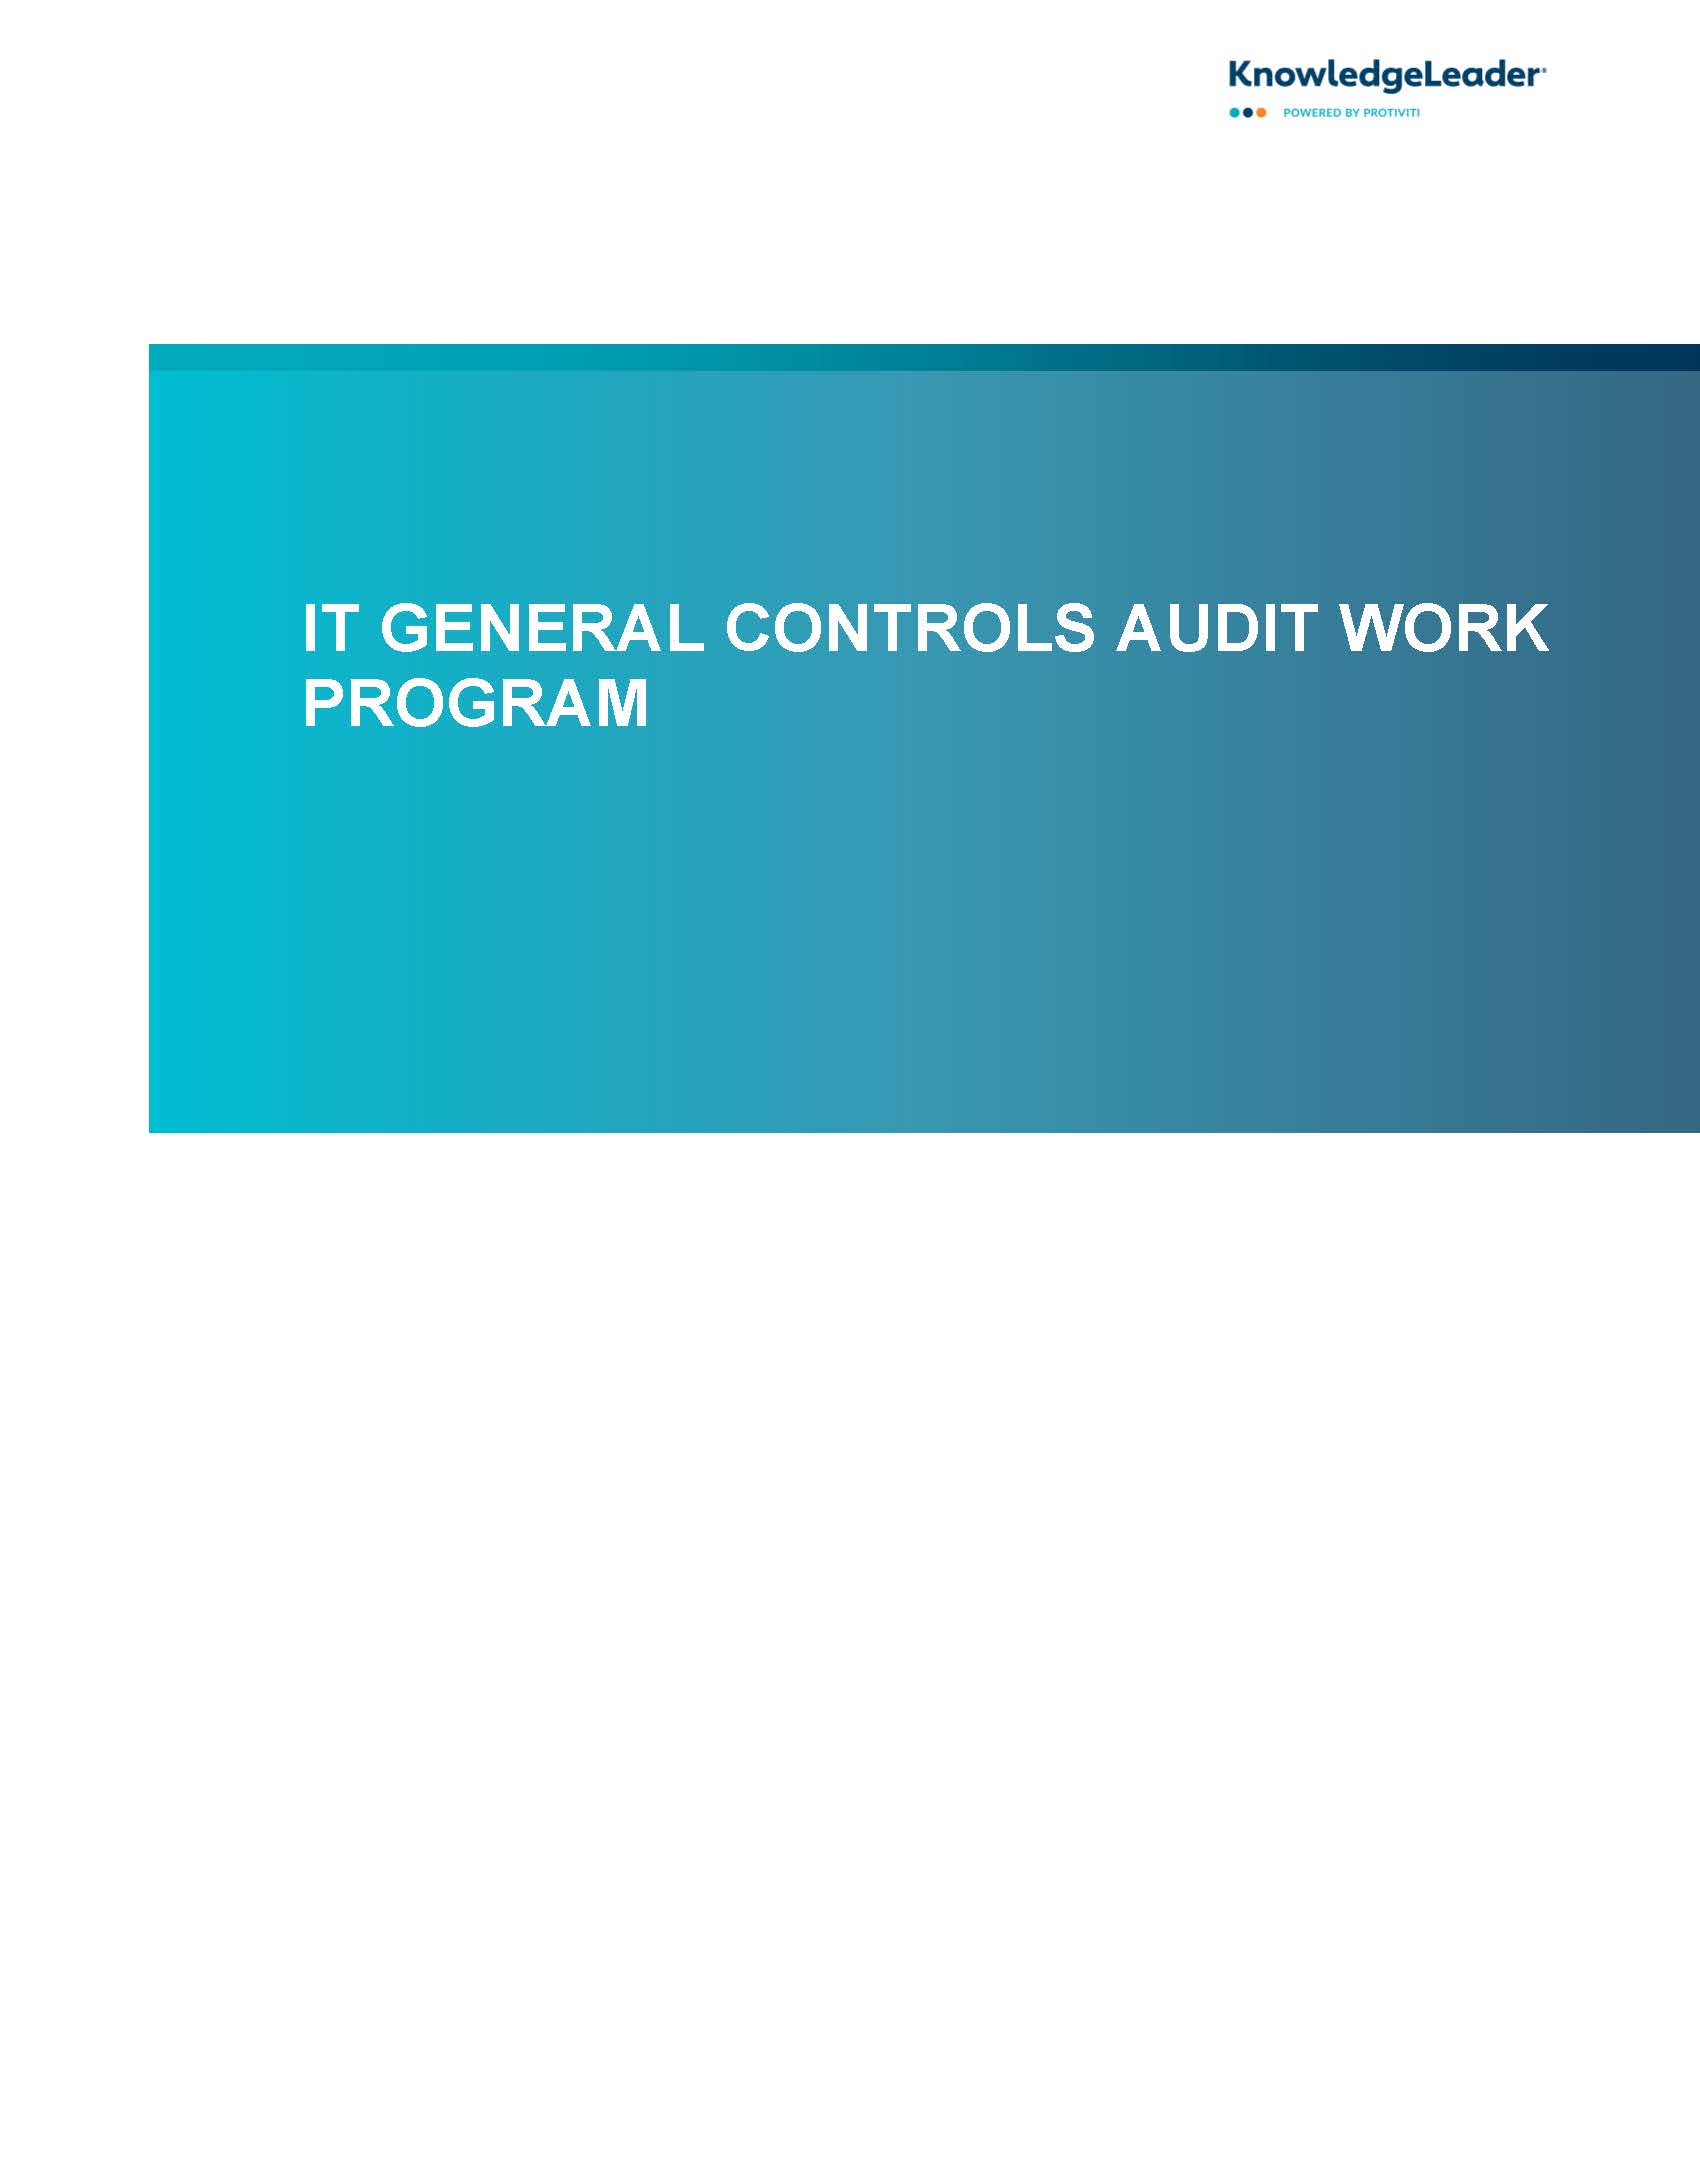 Screenshot of the first page of IT General Controls Audit Work Program